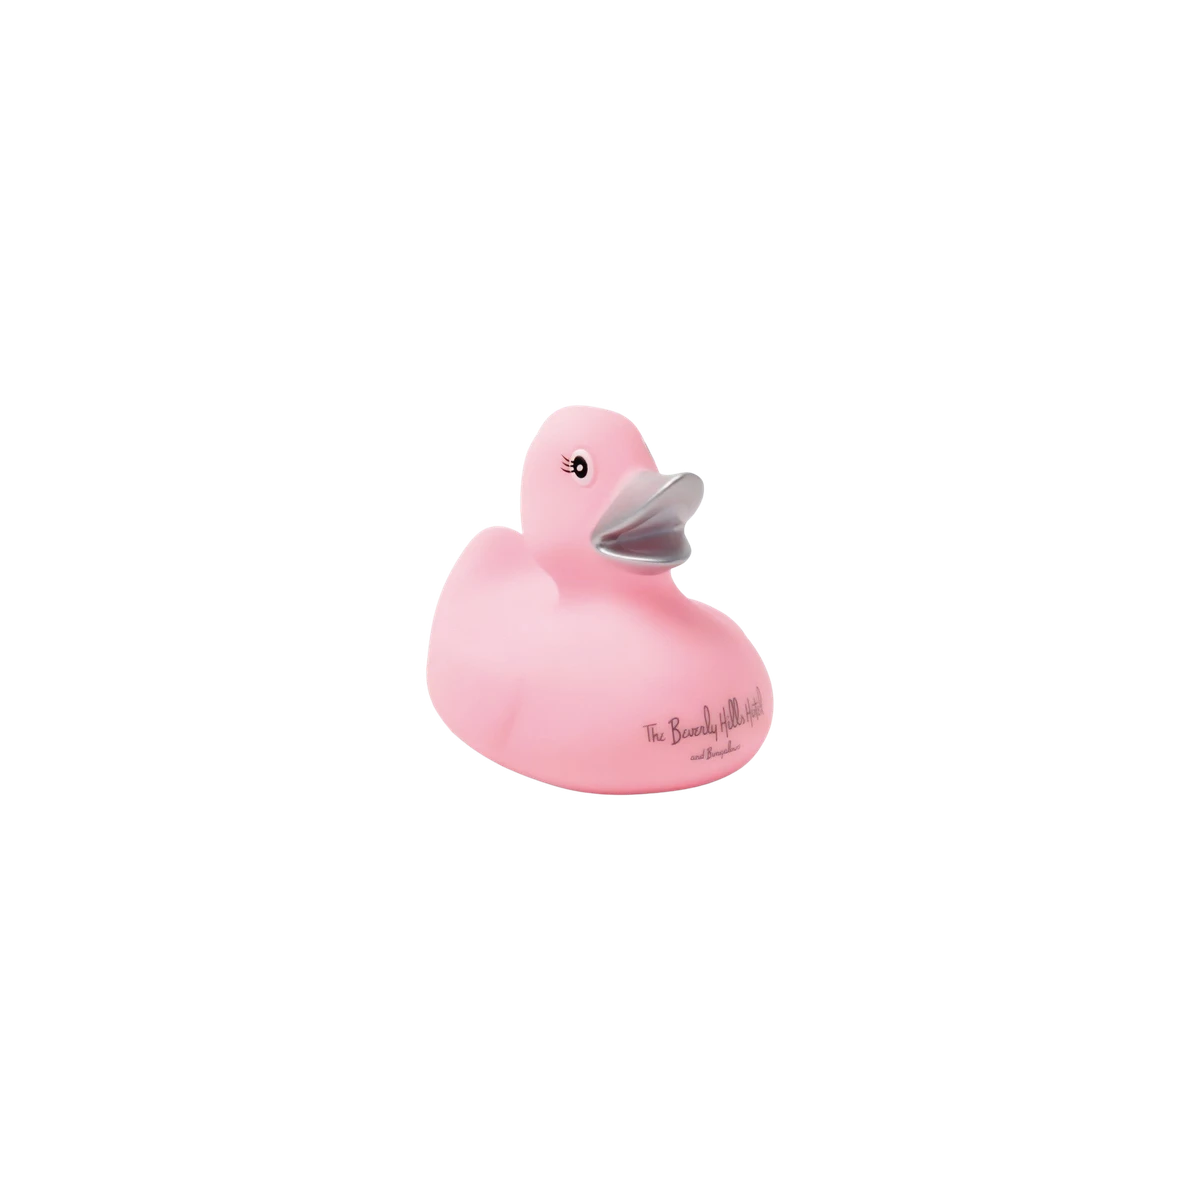 Pink rubber duck